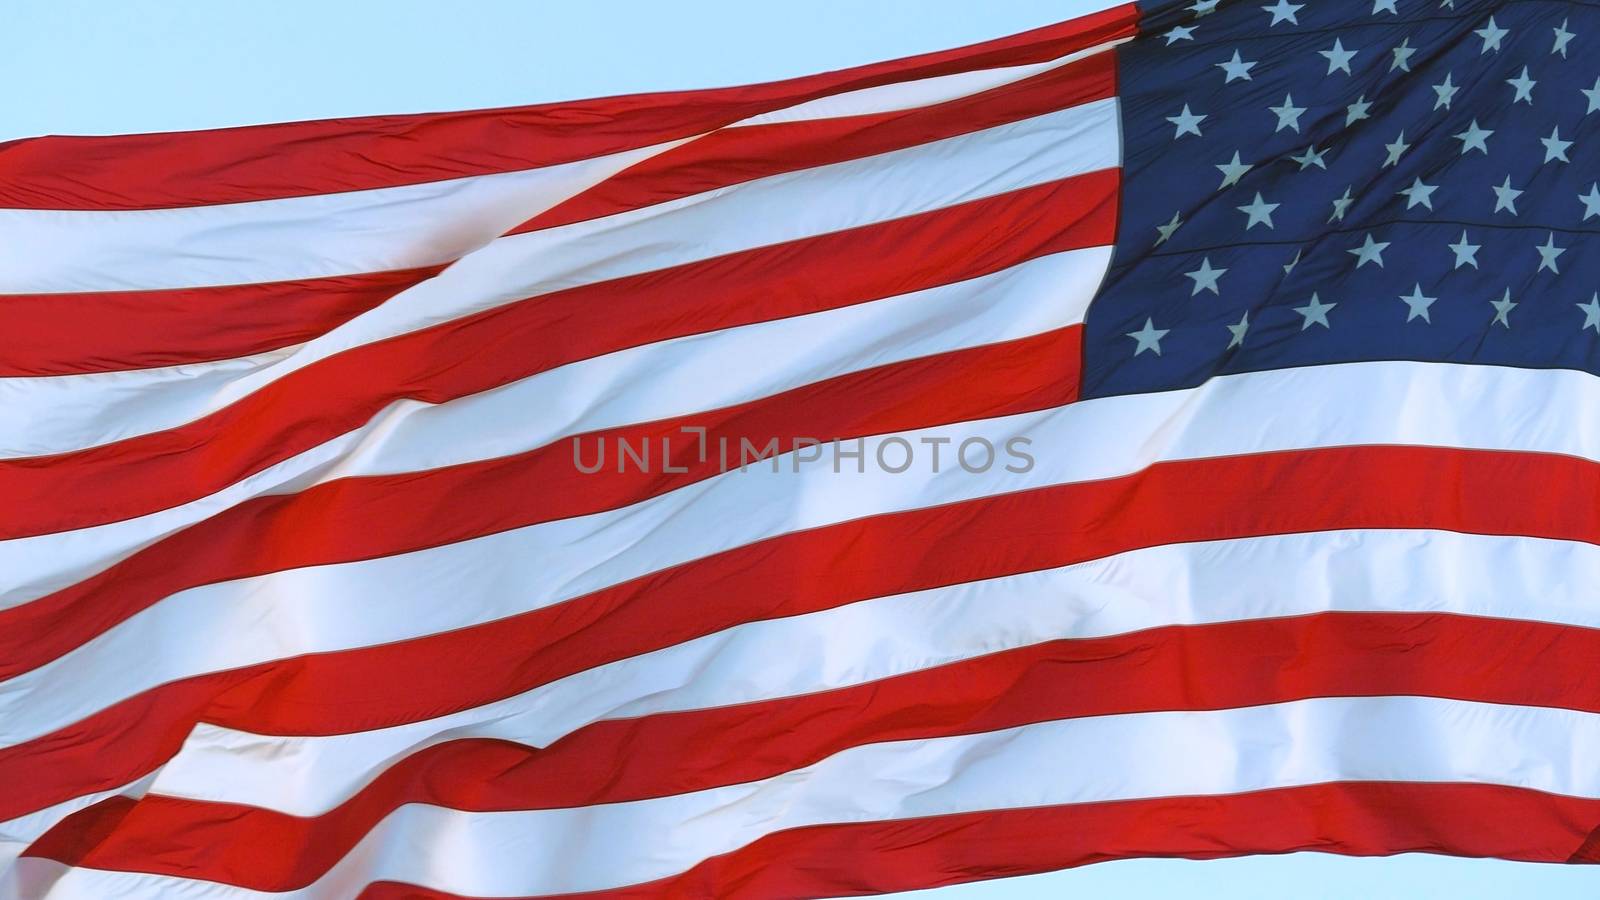 American Flag blowing in the wind with a blue sky. USA American Flag. Waving United states of America famous flag in front of blue sky. Independence Day, Labor day, Flag Day - American Celebration